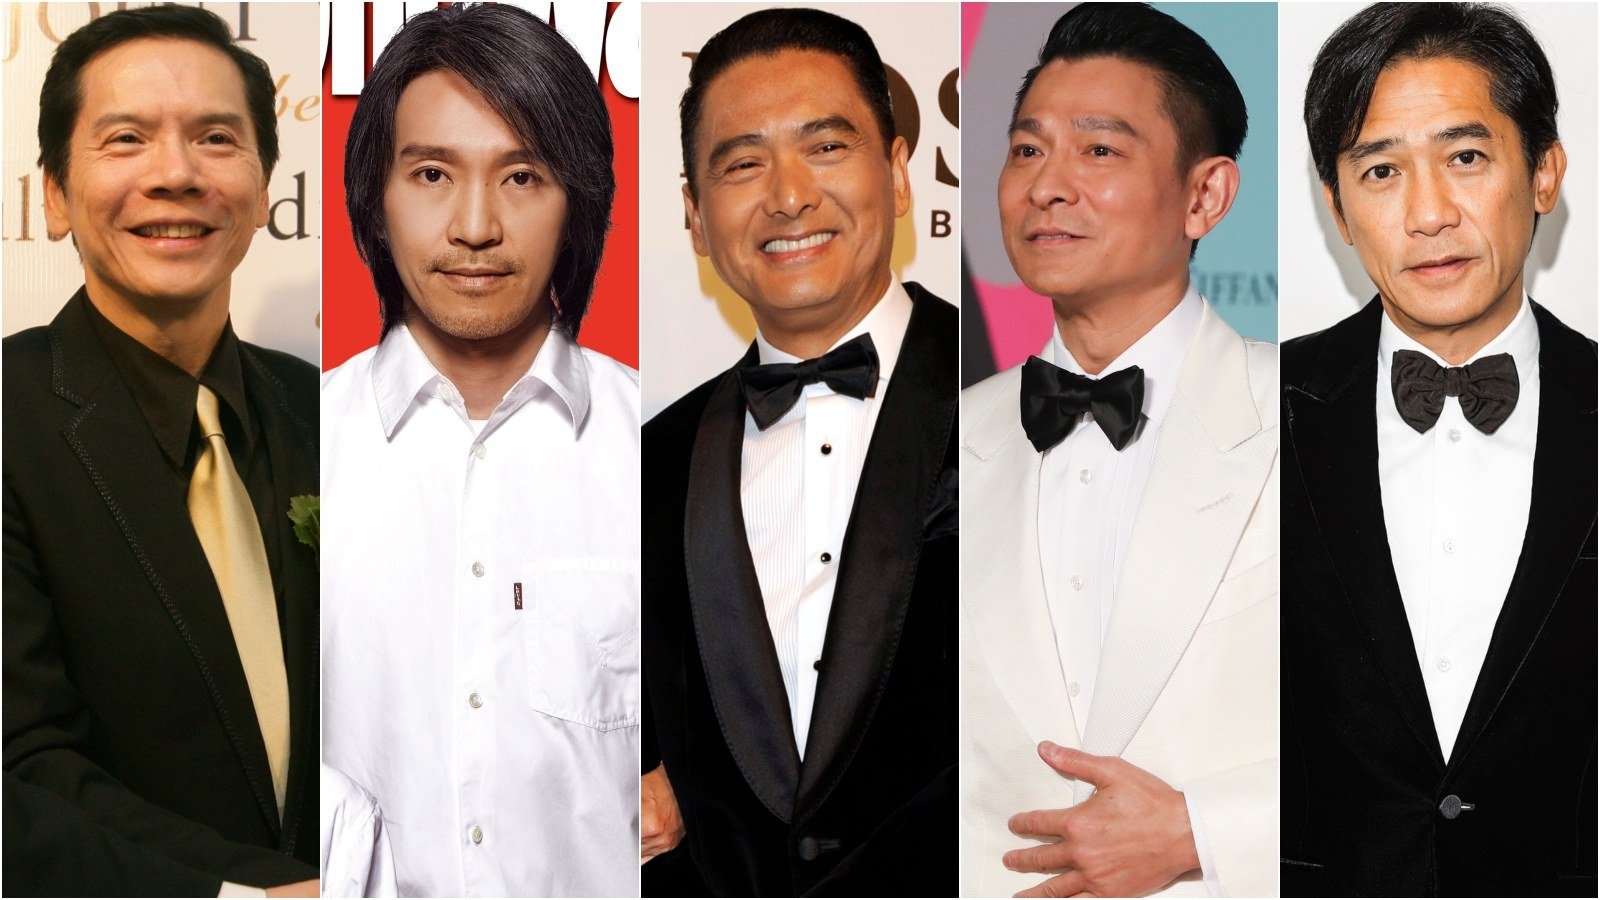 Charles Heung, Stephen Chow, Chow Yun-fat, Andy Lau and Tony Leung all star in the God of Gamblers mega-franchise. Photos: Ricky Chung, Handout, Hugo Boss, Edward Wong, @carinalau1208/Instagram